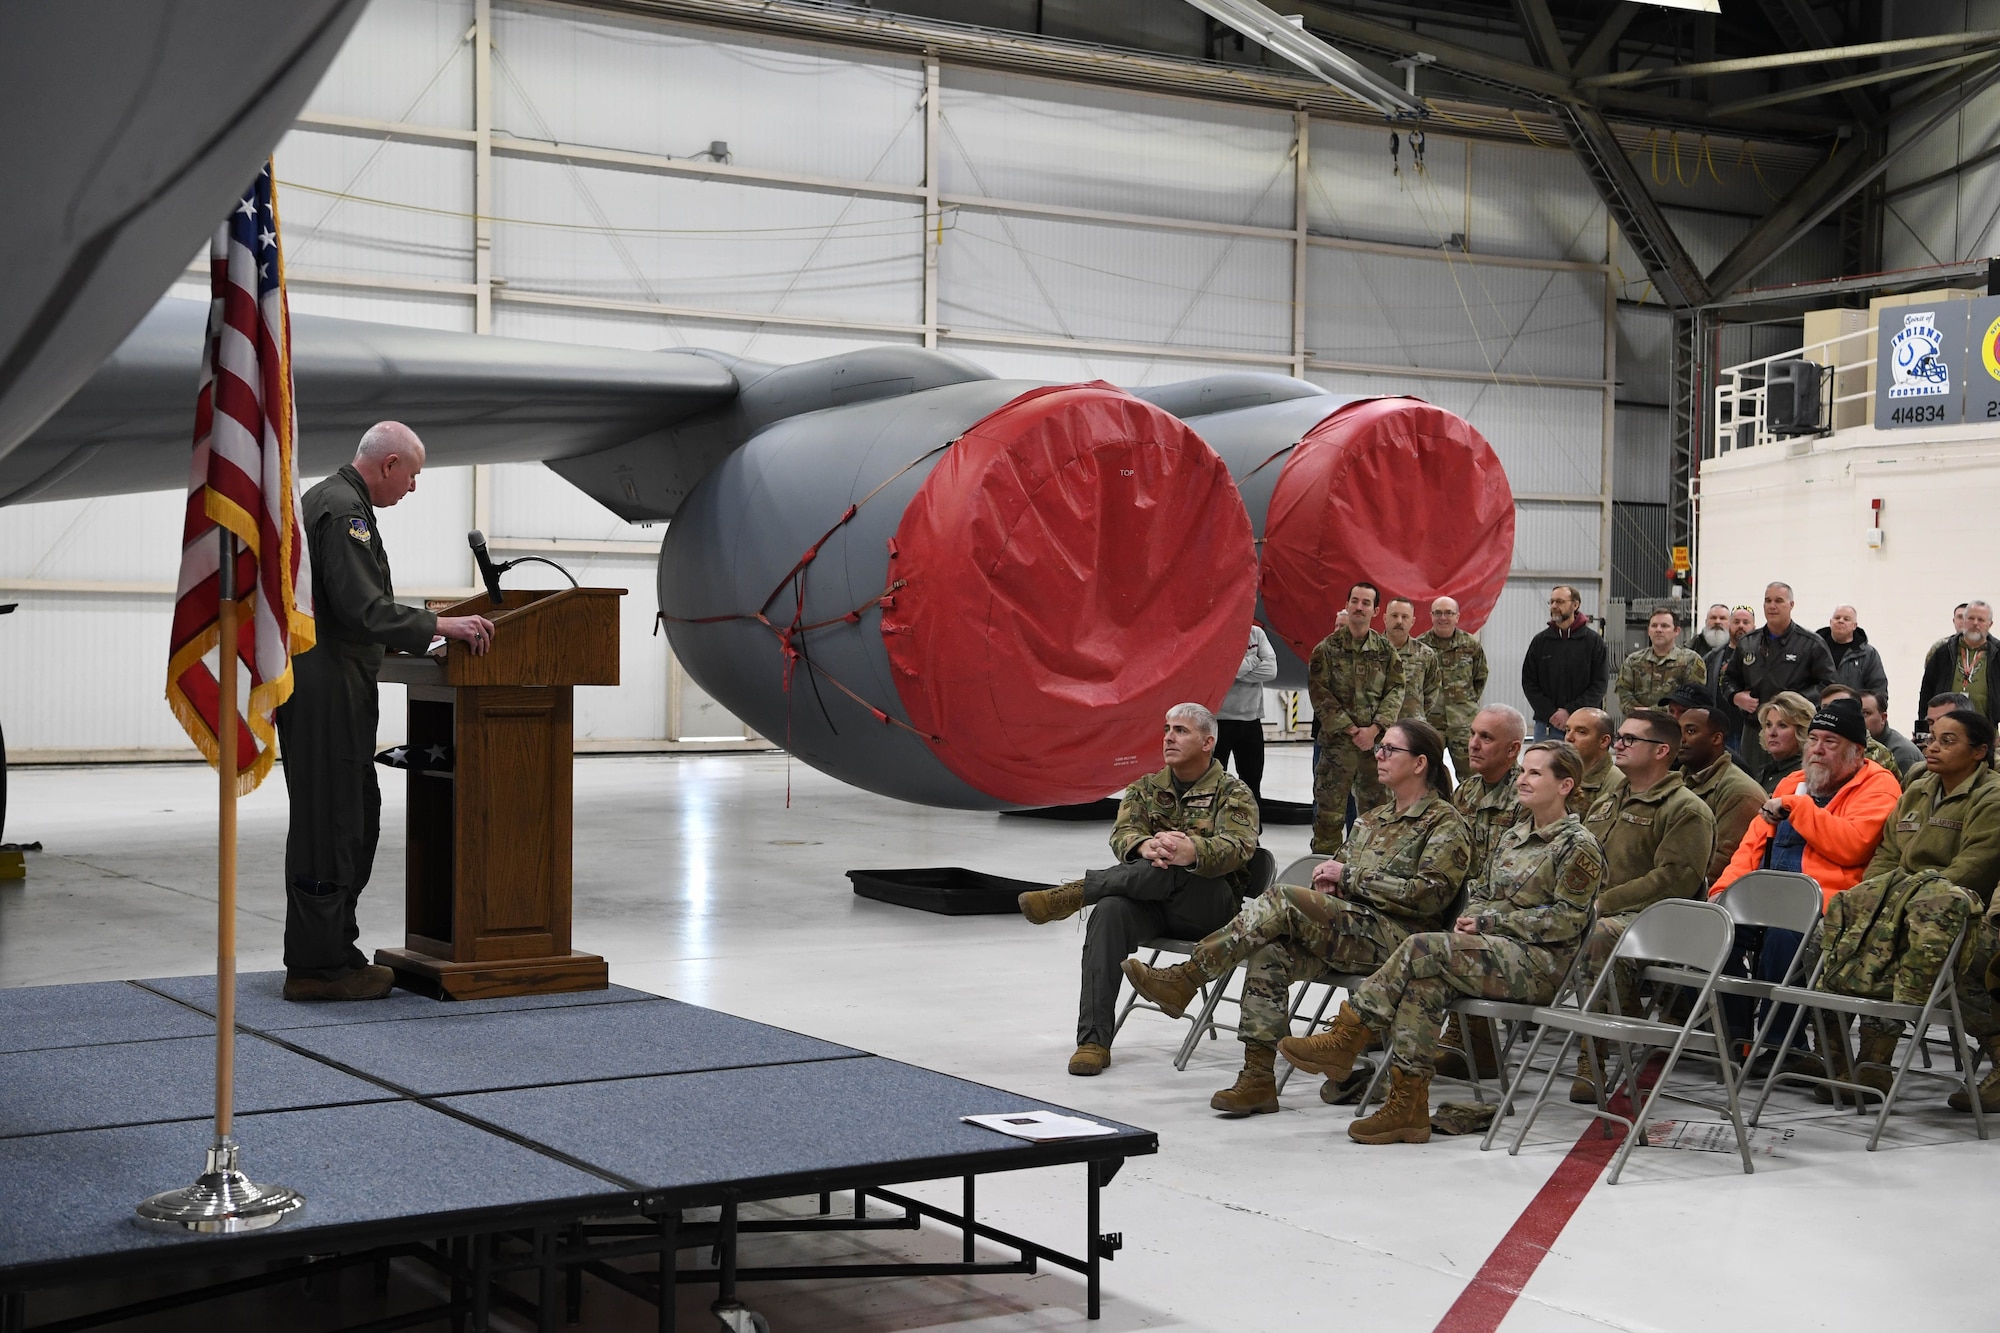 Col Thom Pemberton, 434th Air Refueling Wing commander, talks to current and former 434th Air Refueling Wing members during retirement ceremony for  KC-135R 62-3530 on February 24, 2023.  The aircraft will head to the boneyard after more than 60 years of service. (Photo by Douglas Hays)